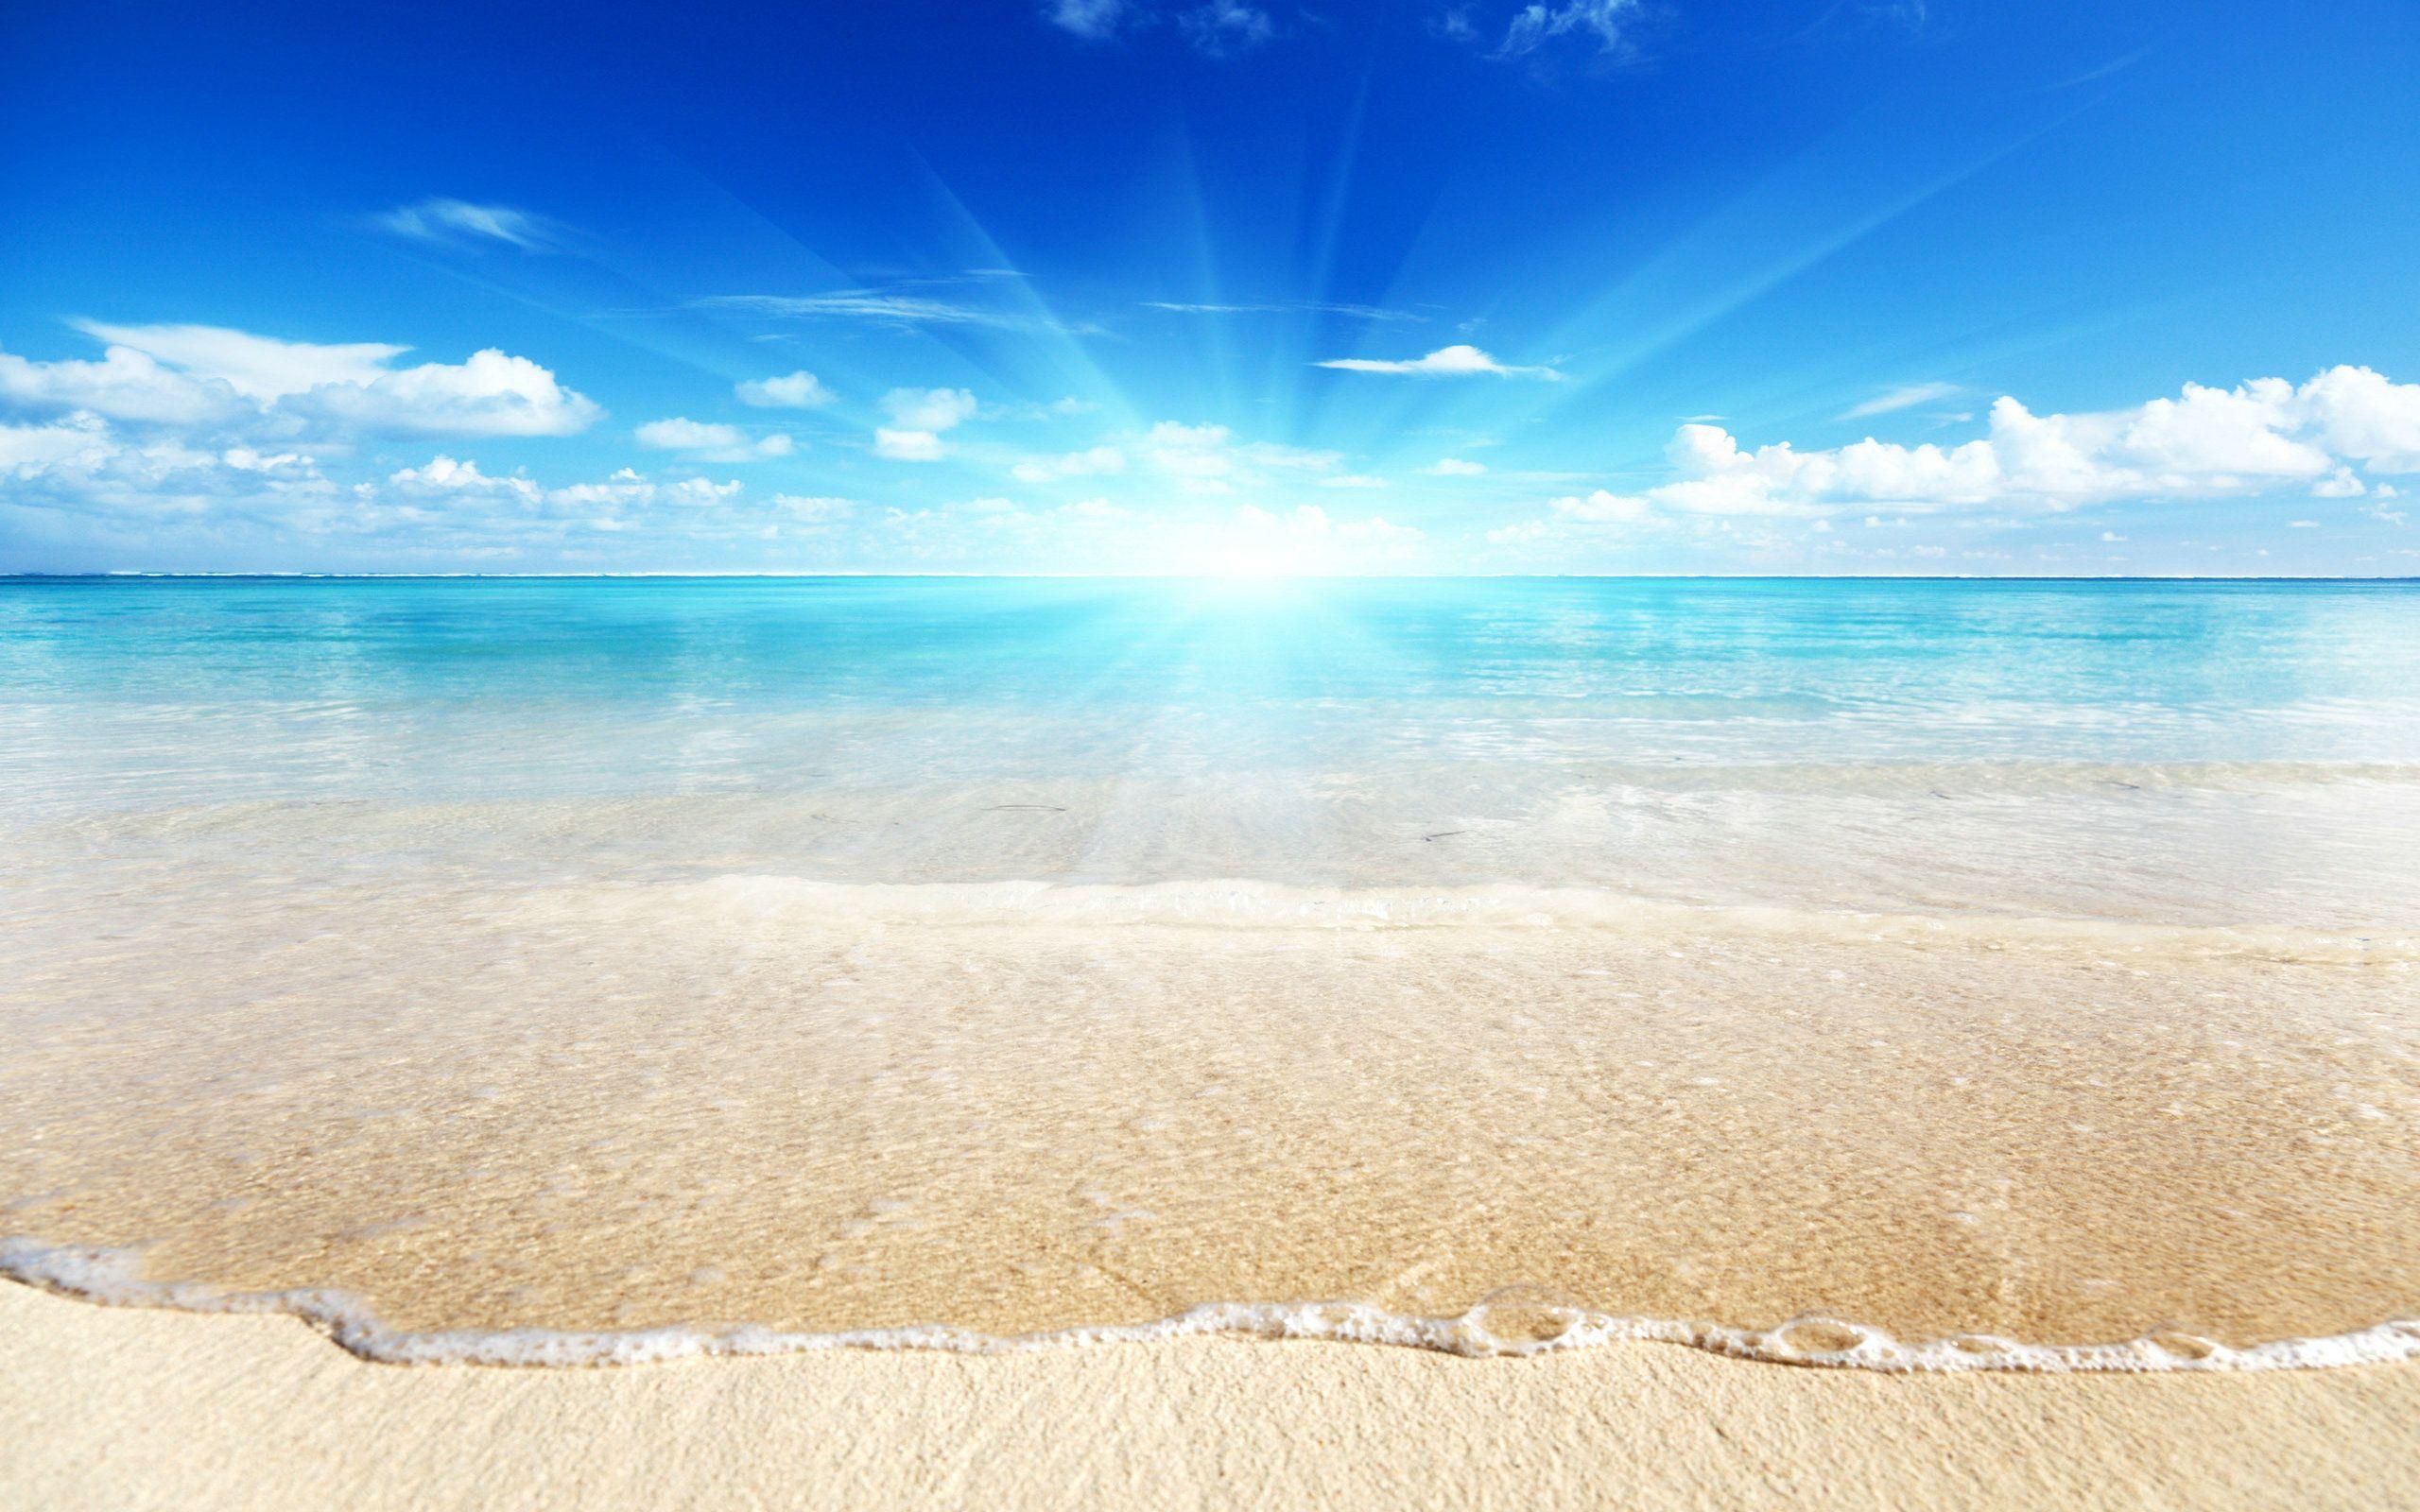 Sun and Beach Wallpapers - Top Free Sun and Beach Backgrounds